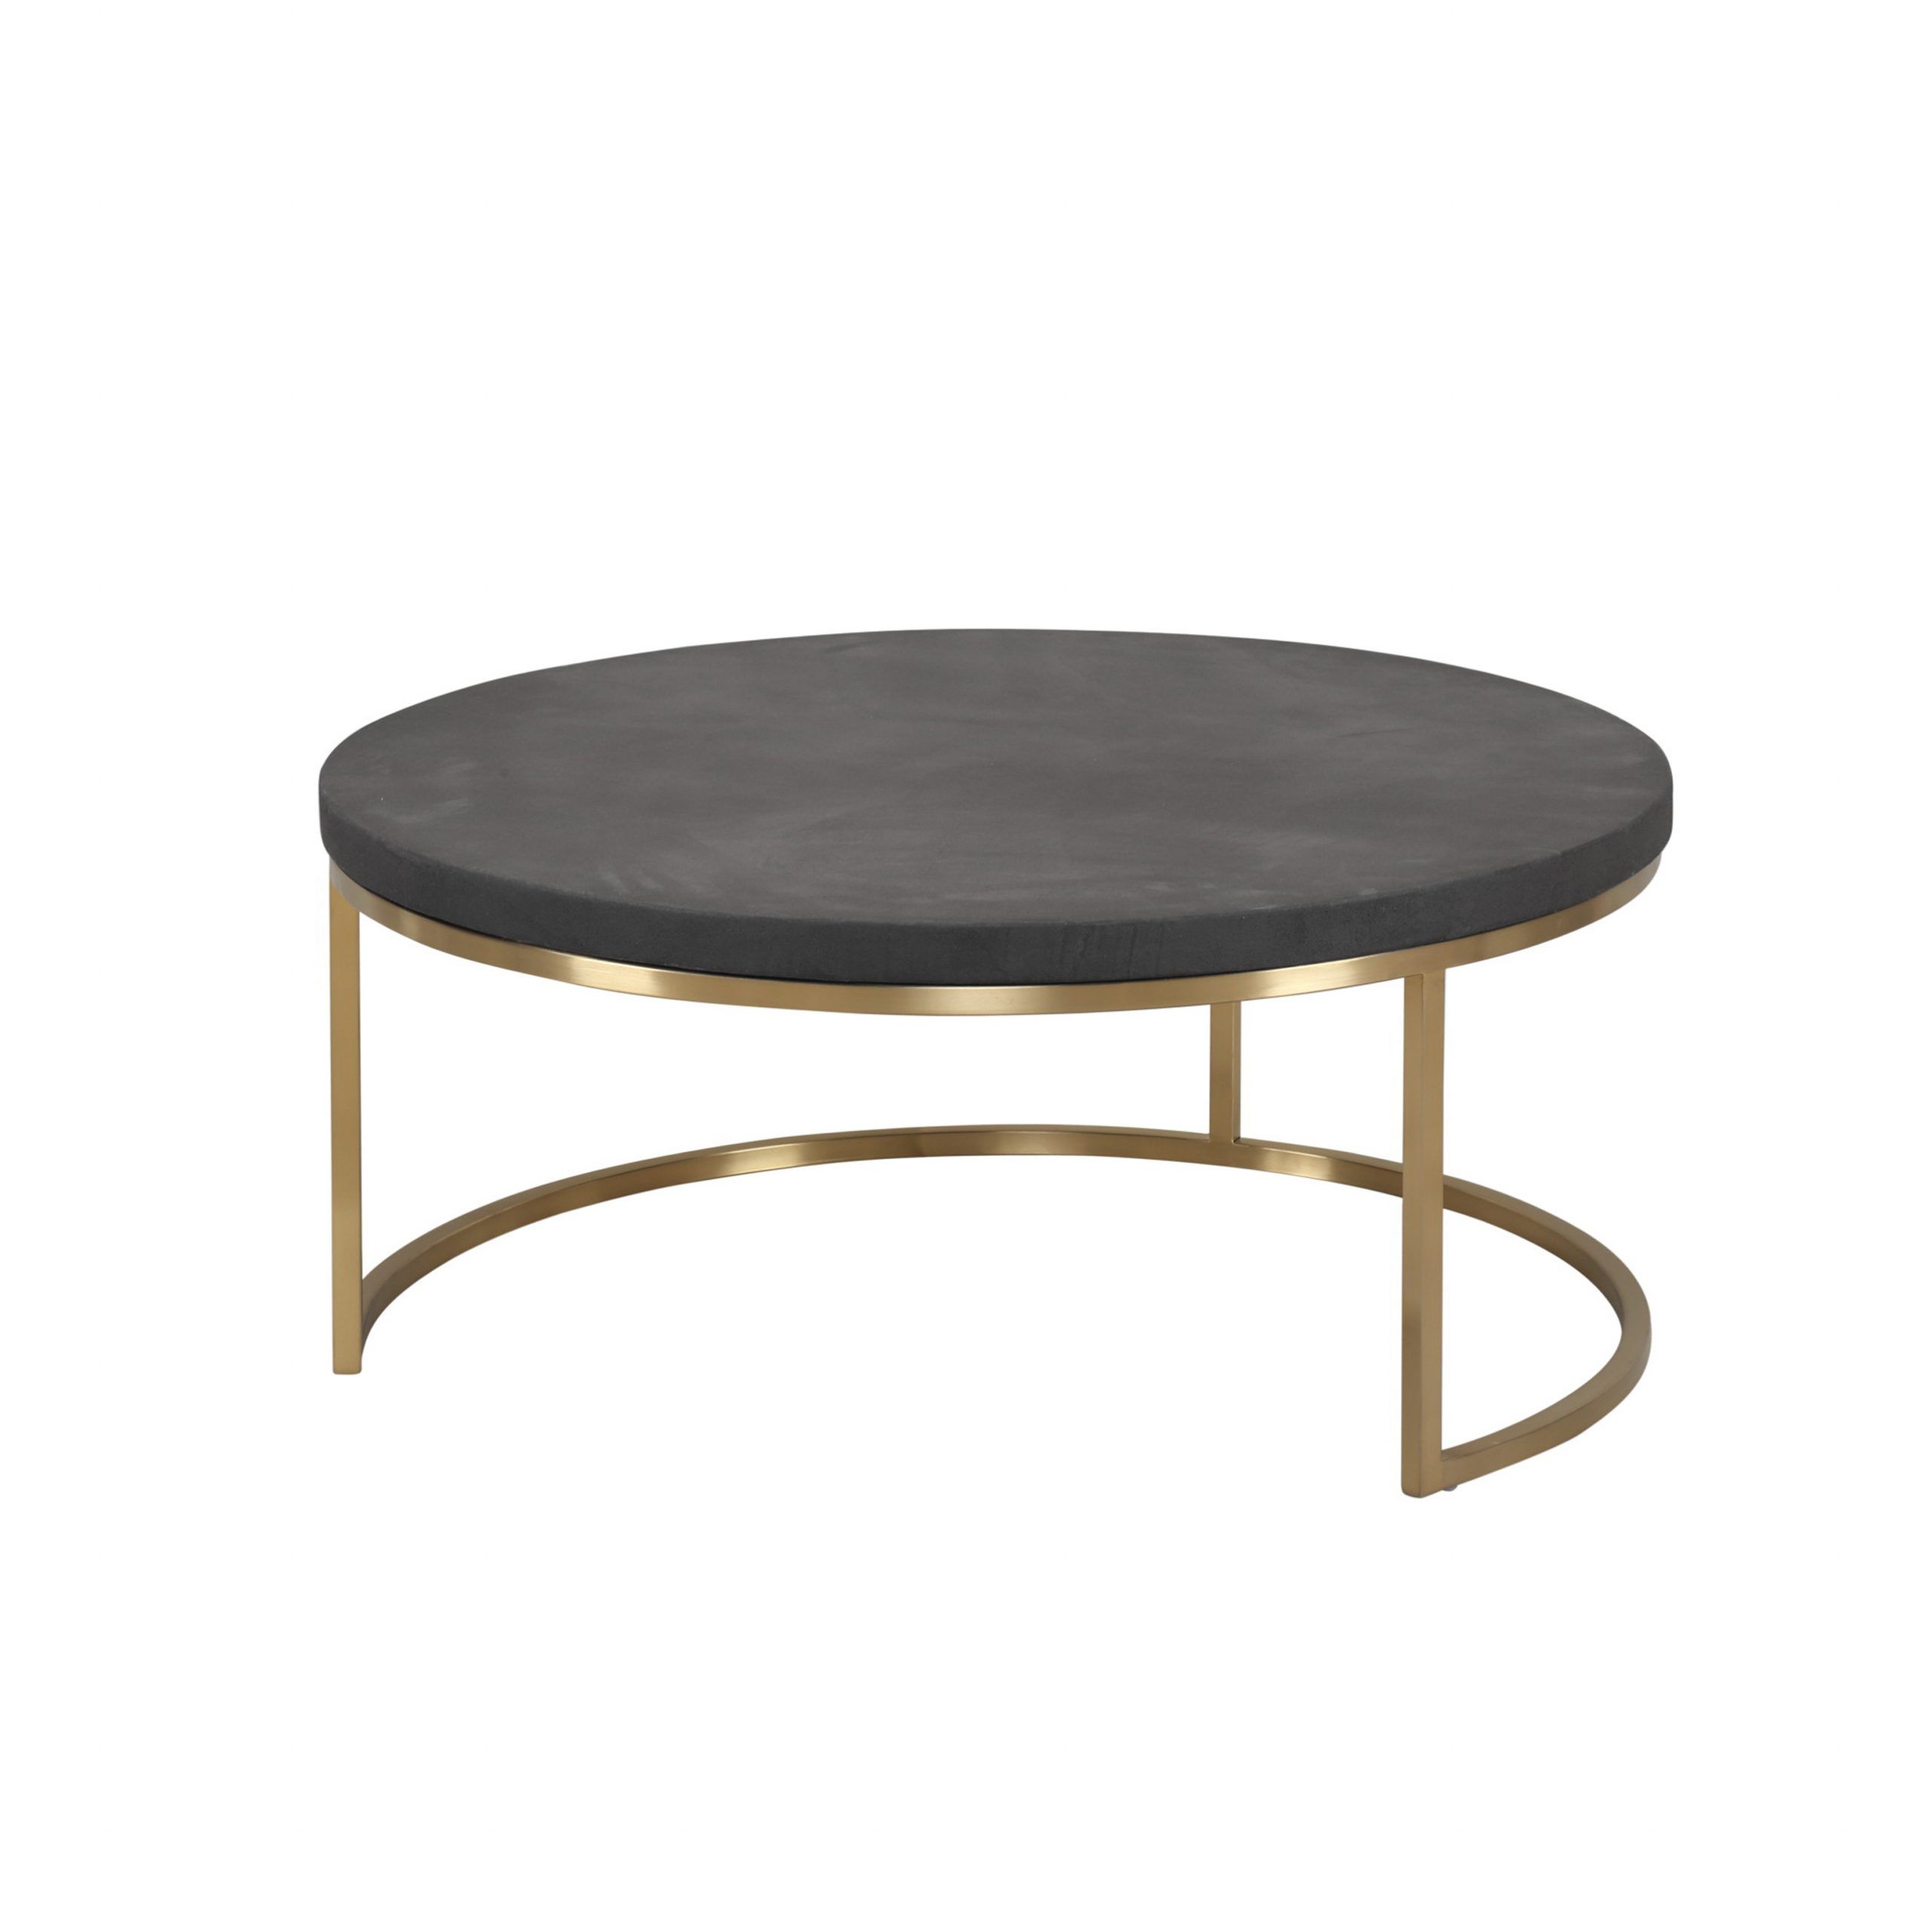 Fashionable Deco 35" Round Coffee Table Black Concrete Laminate With With Square Black And Brushed Gold Coffee Tables (View 7 of 20)